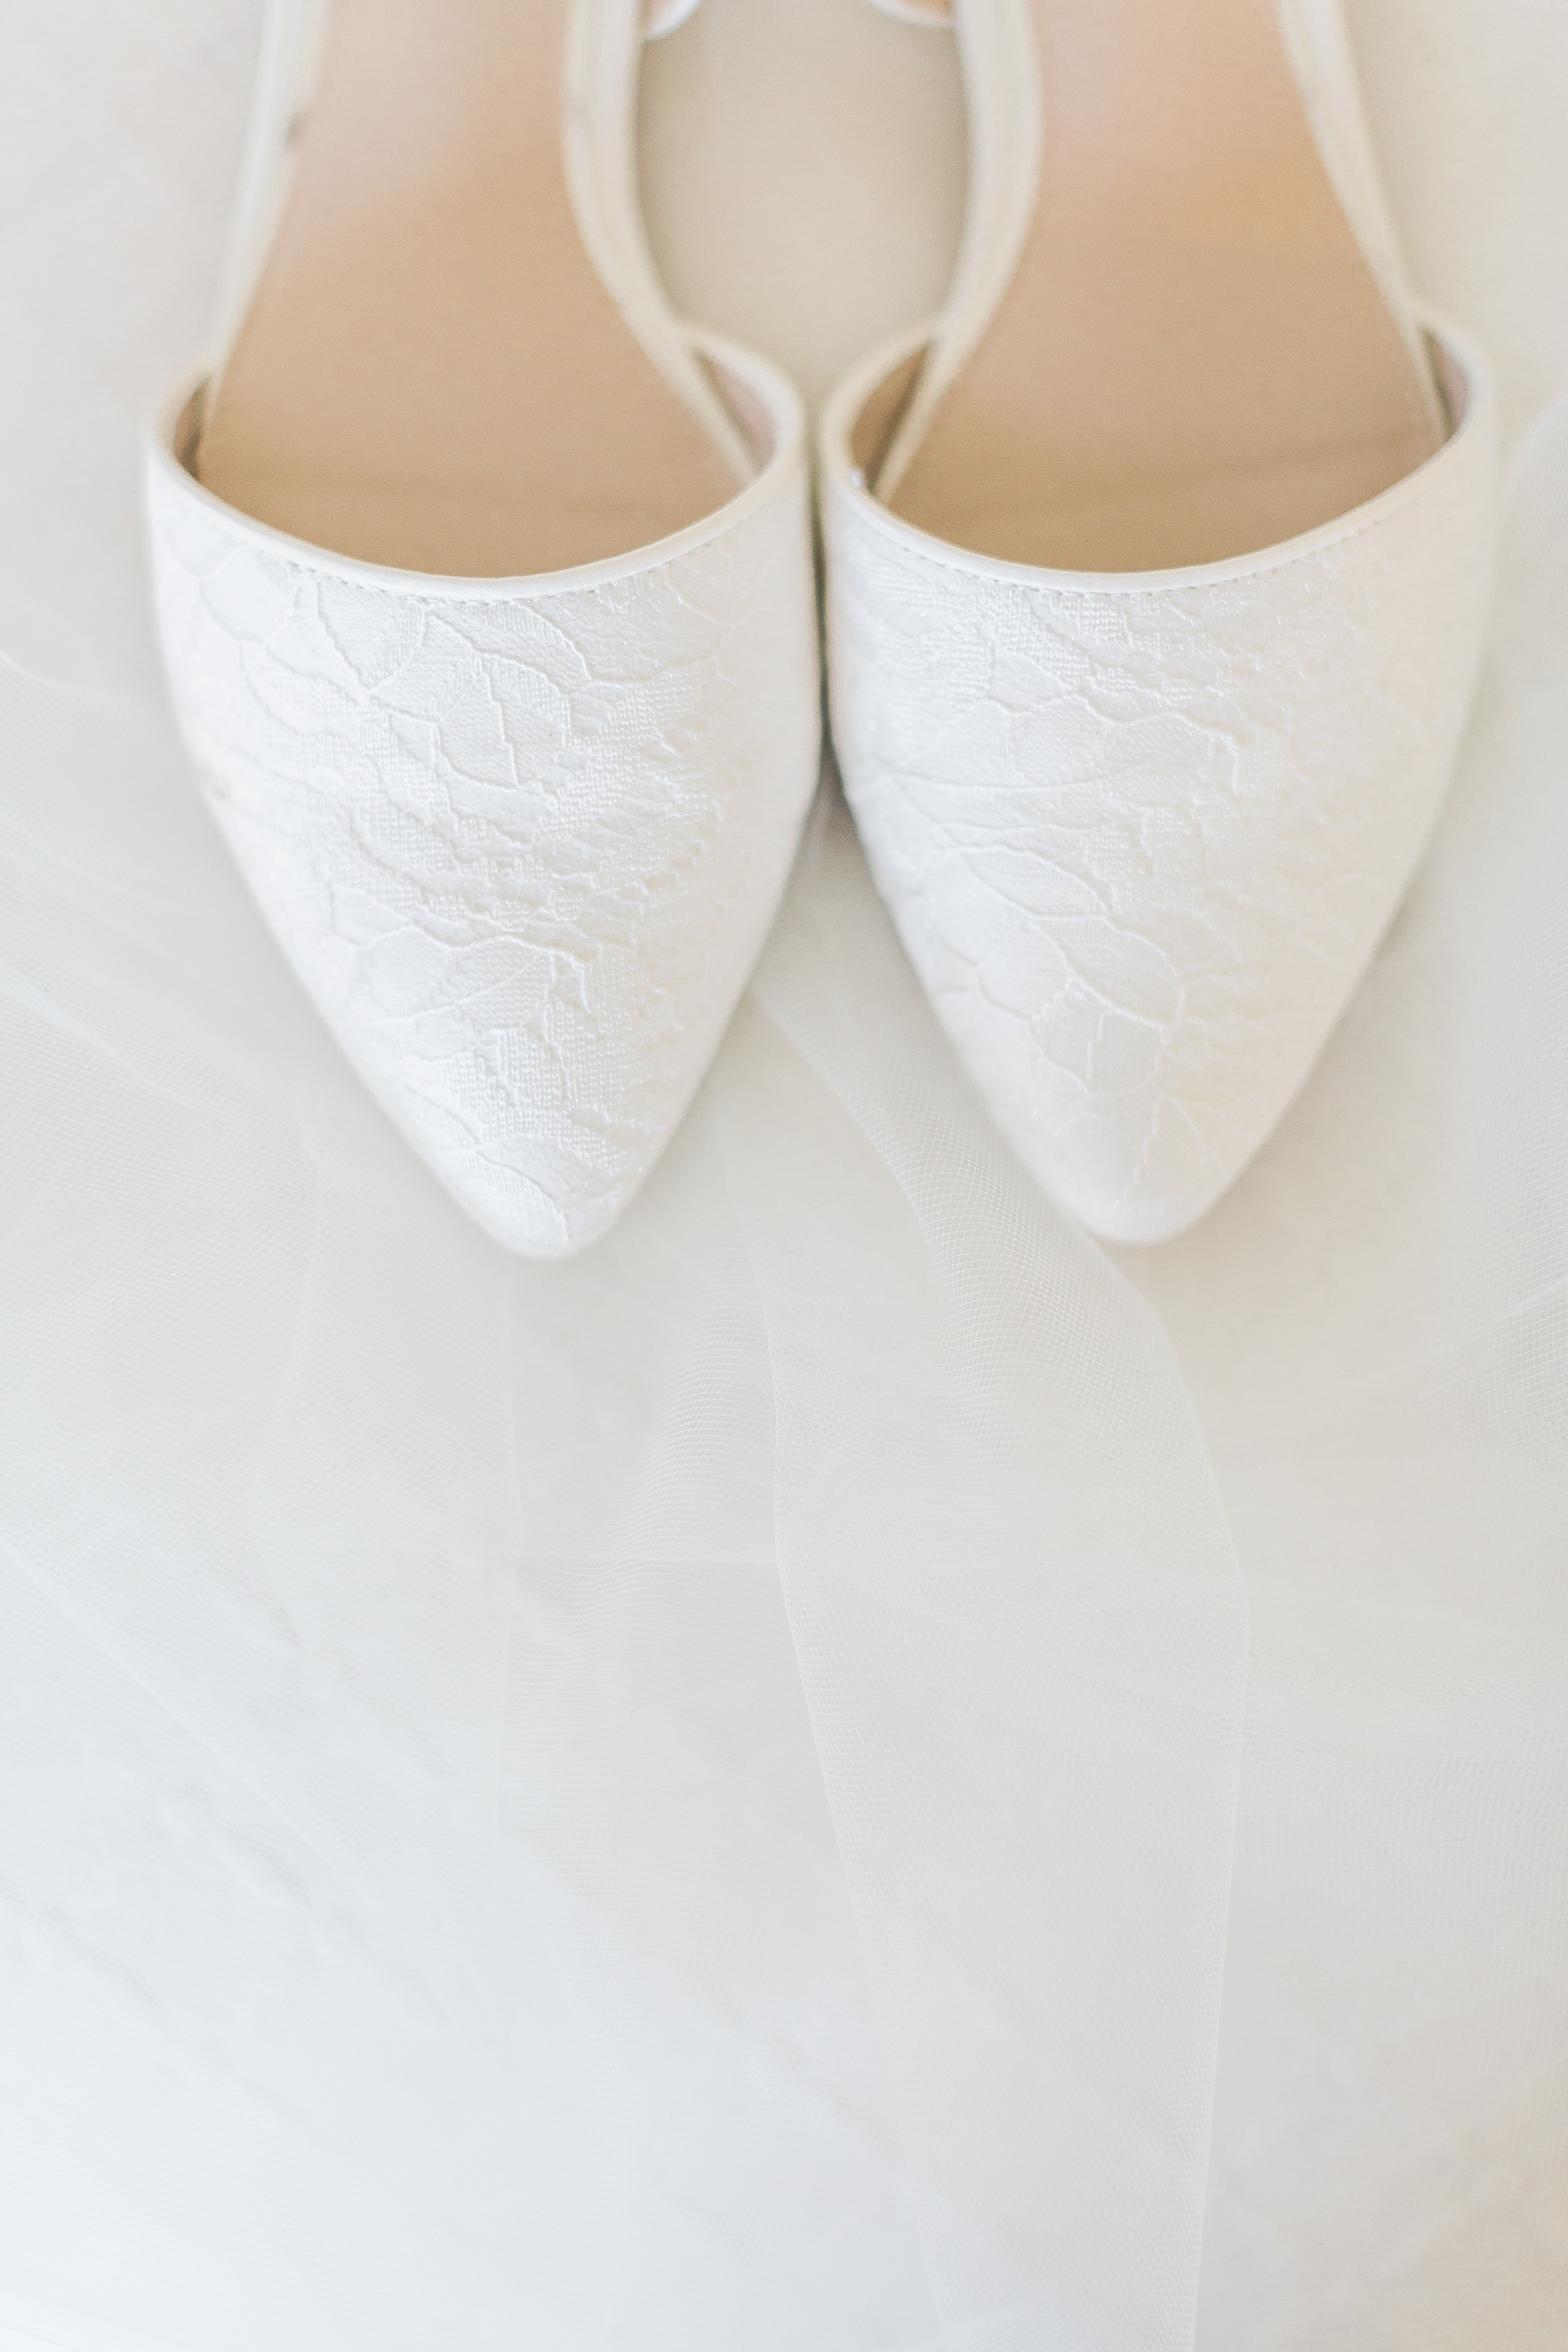 the front/tips/toes of white bridal shoes photographed against a white veil